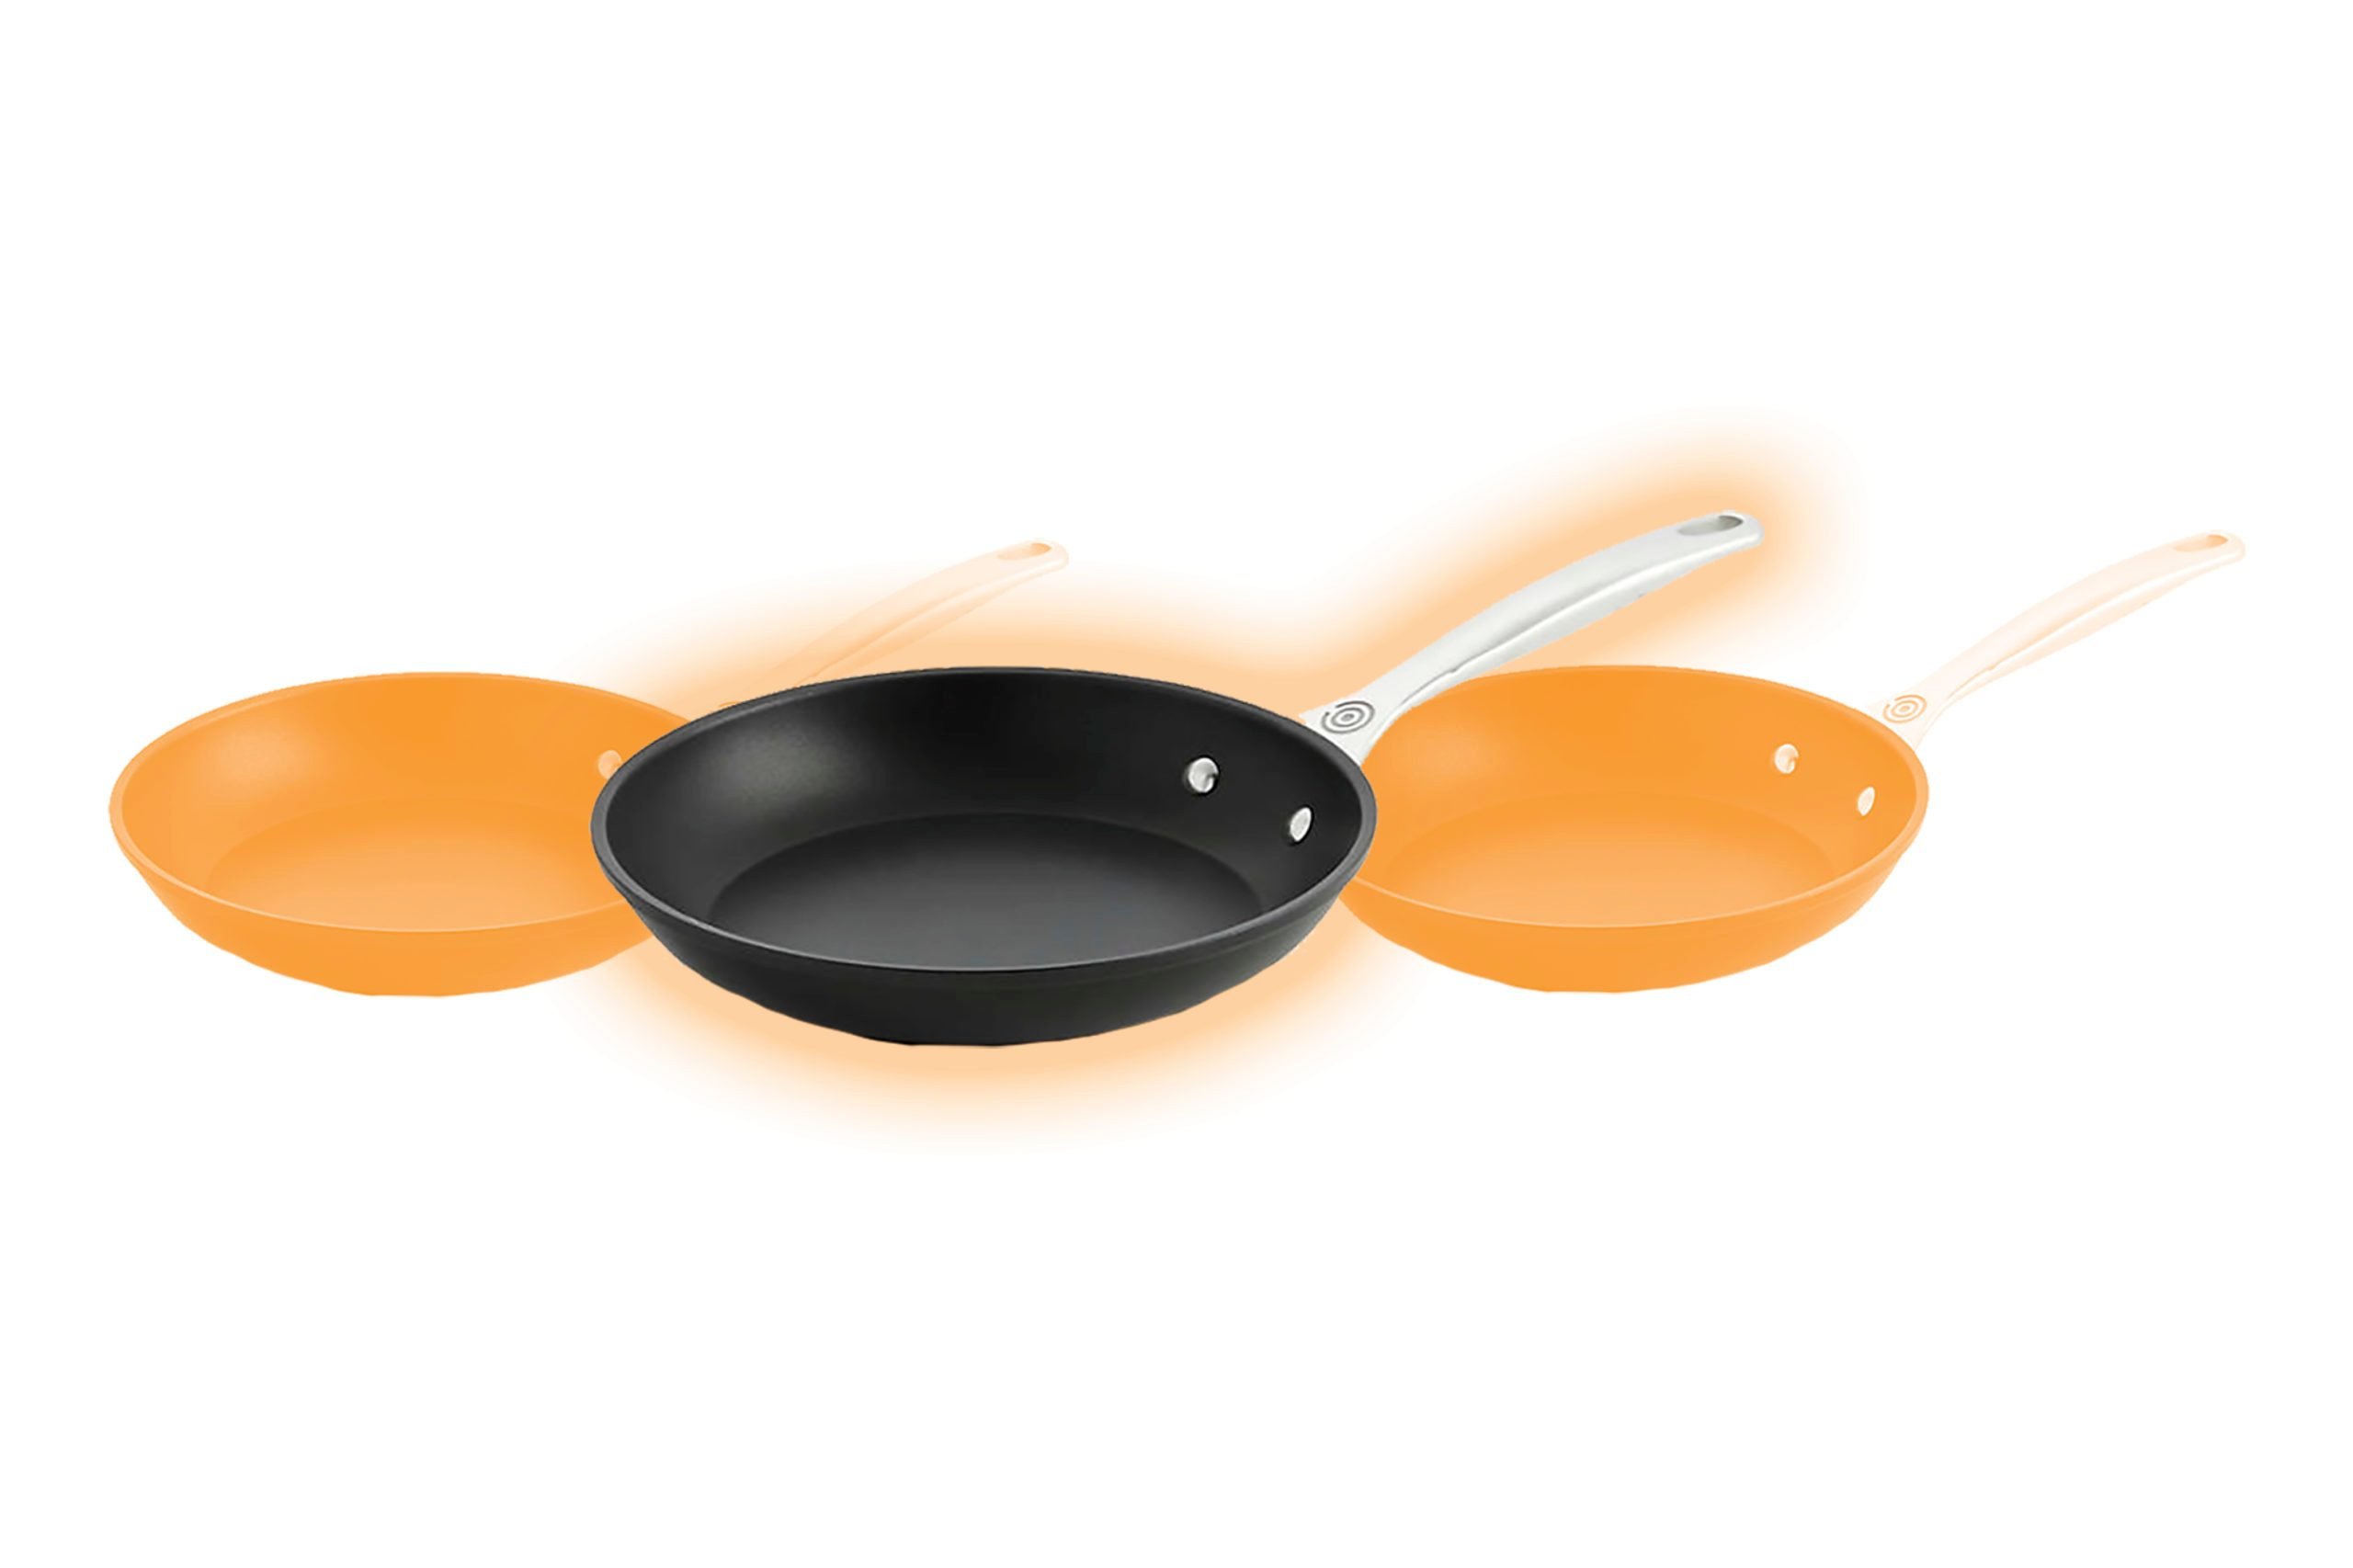 The Best Non-Stick Frying Pan Brands According to Kitchen Pros [2022]